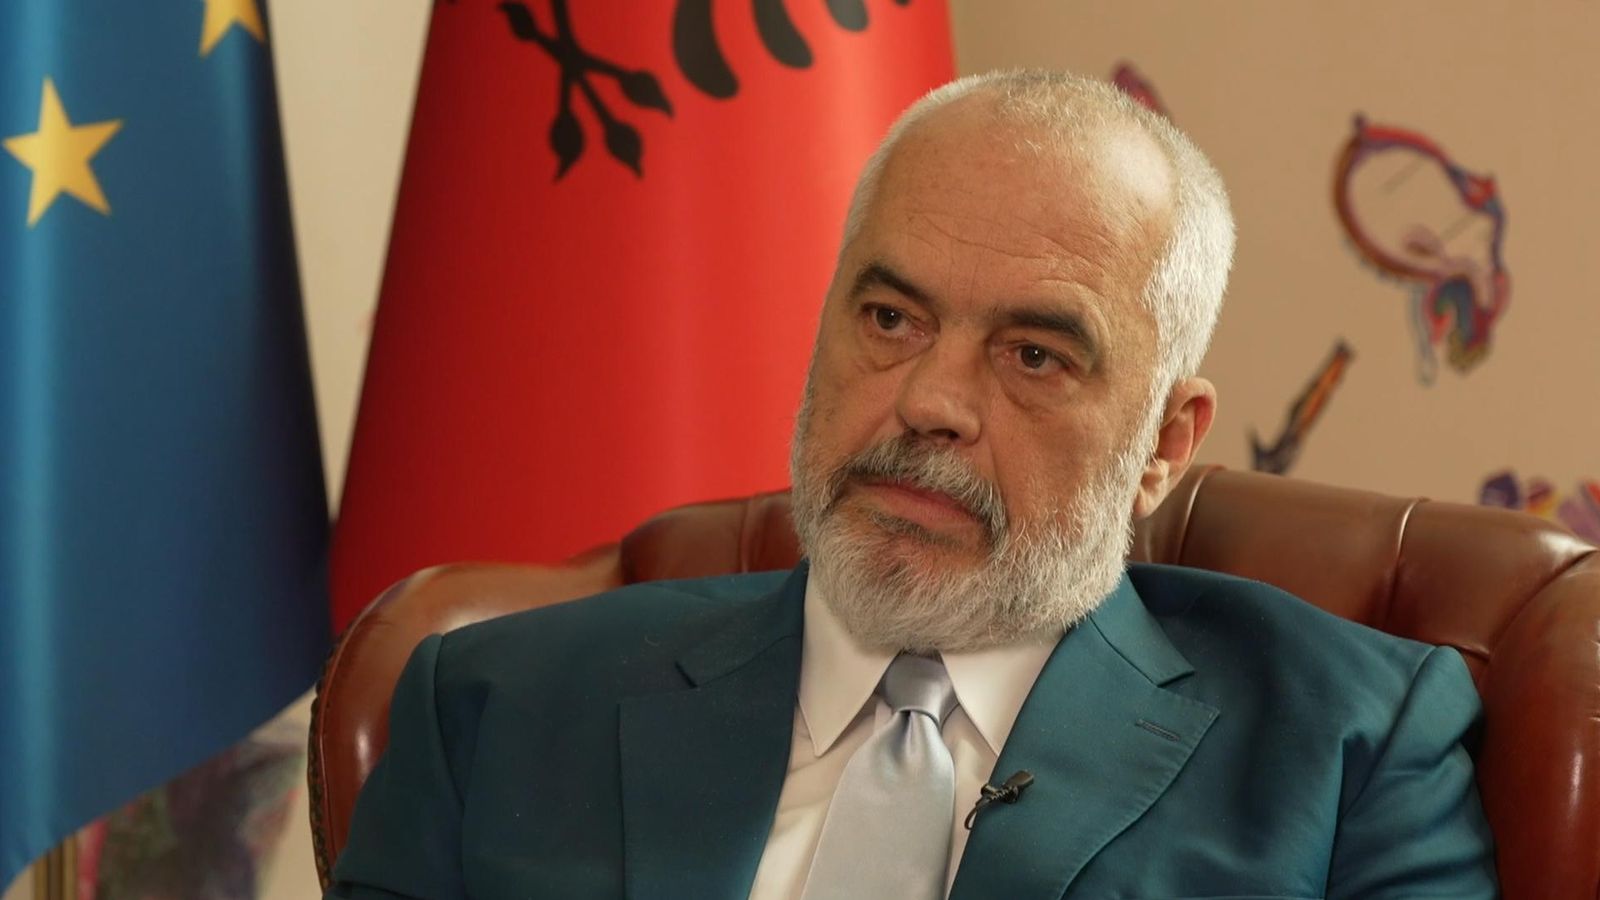 Singling out Albanian migrants 'very disgraceful moment in British politics,' says country's PM Edi Rama